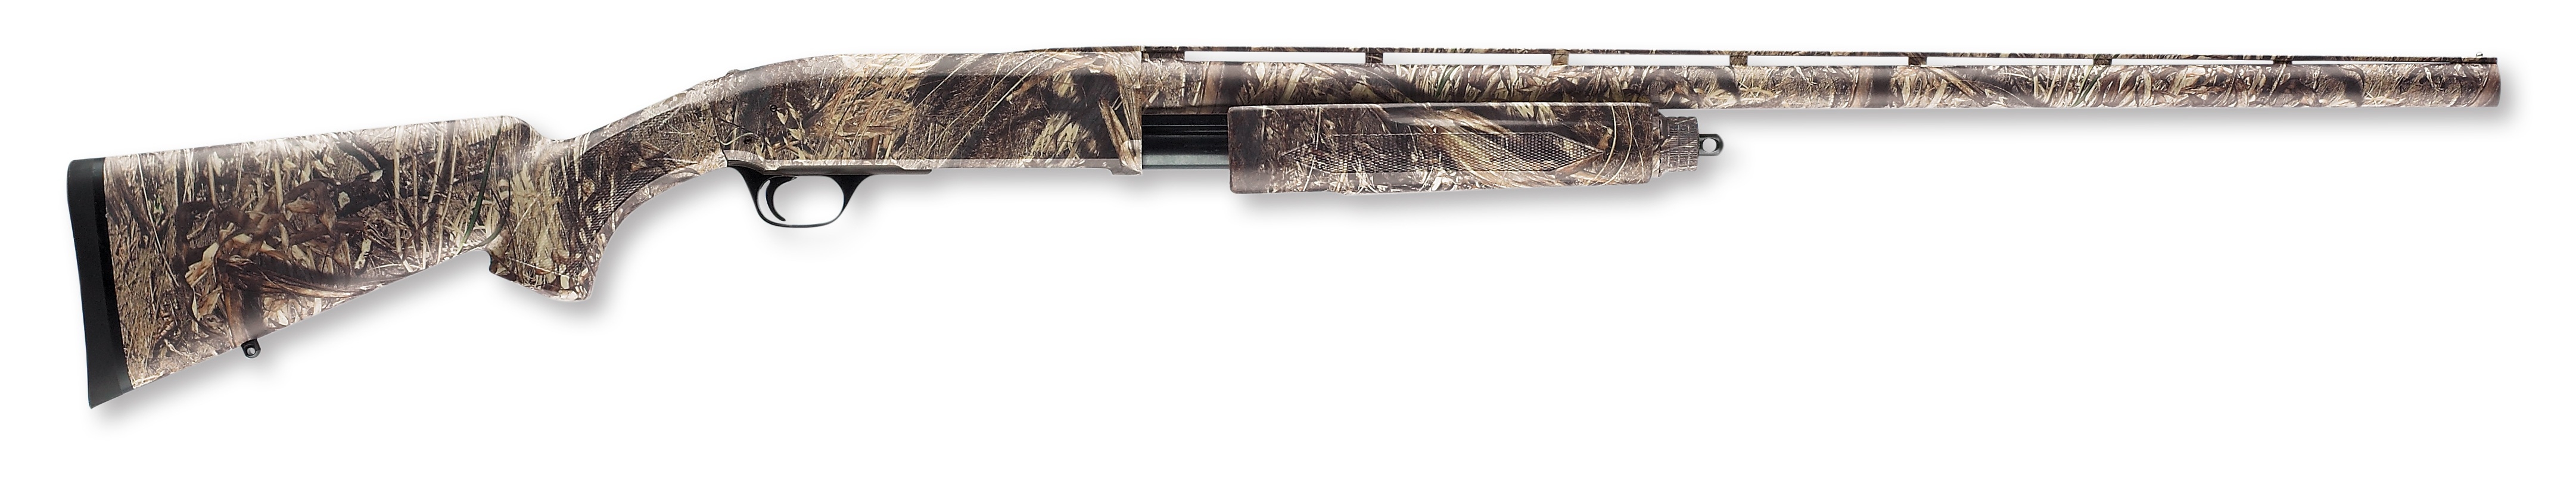 Browning BPS Mossy Oak Duck Blind